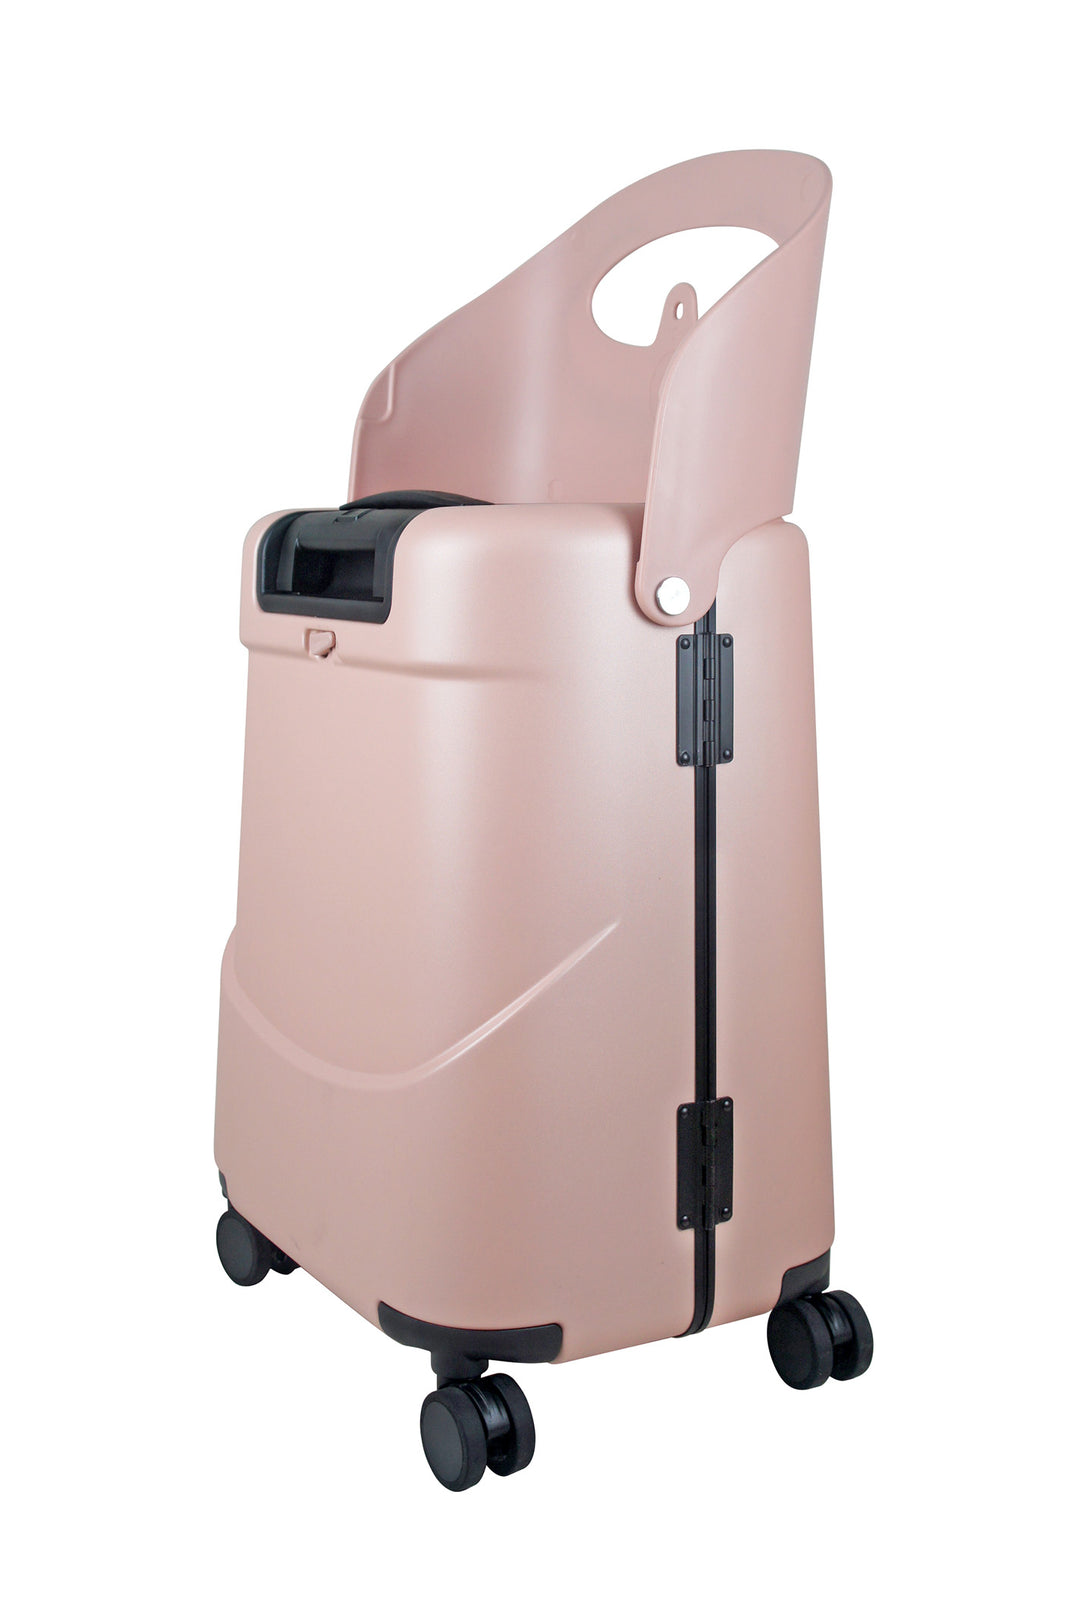 miamily luggage 18 inch dusty pink